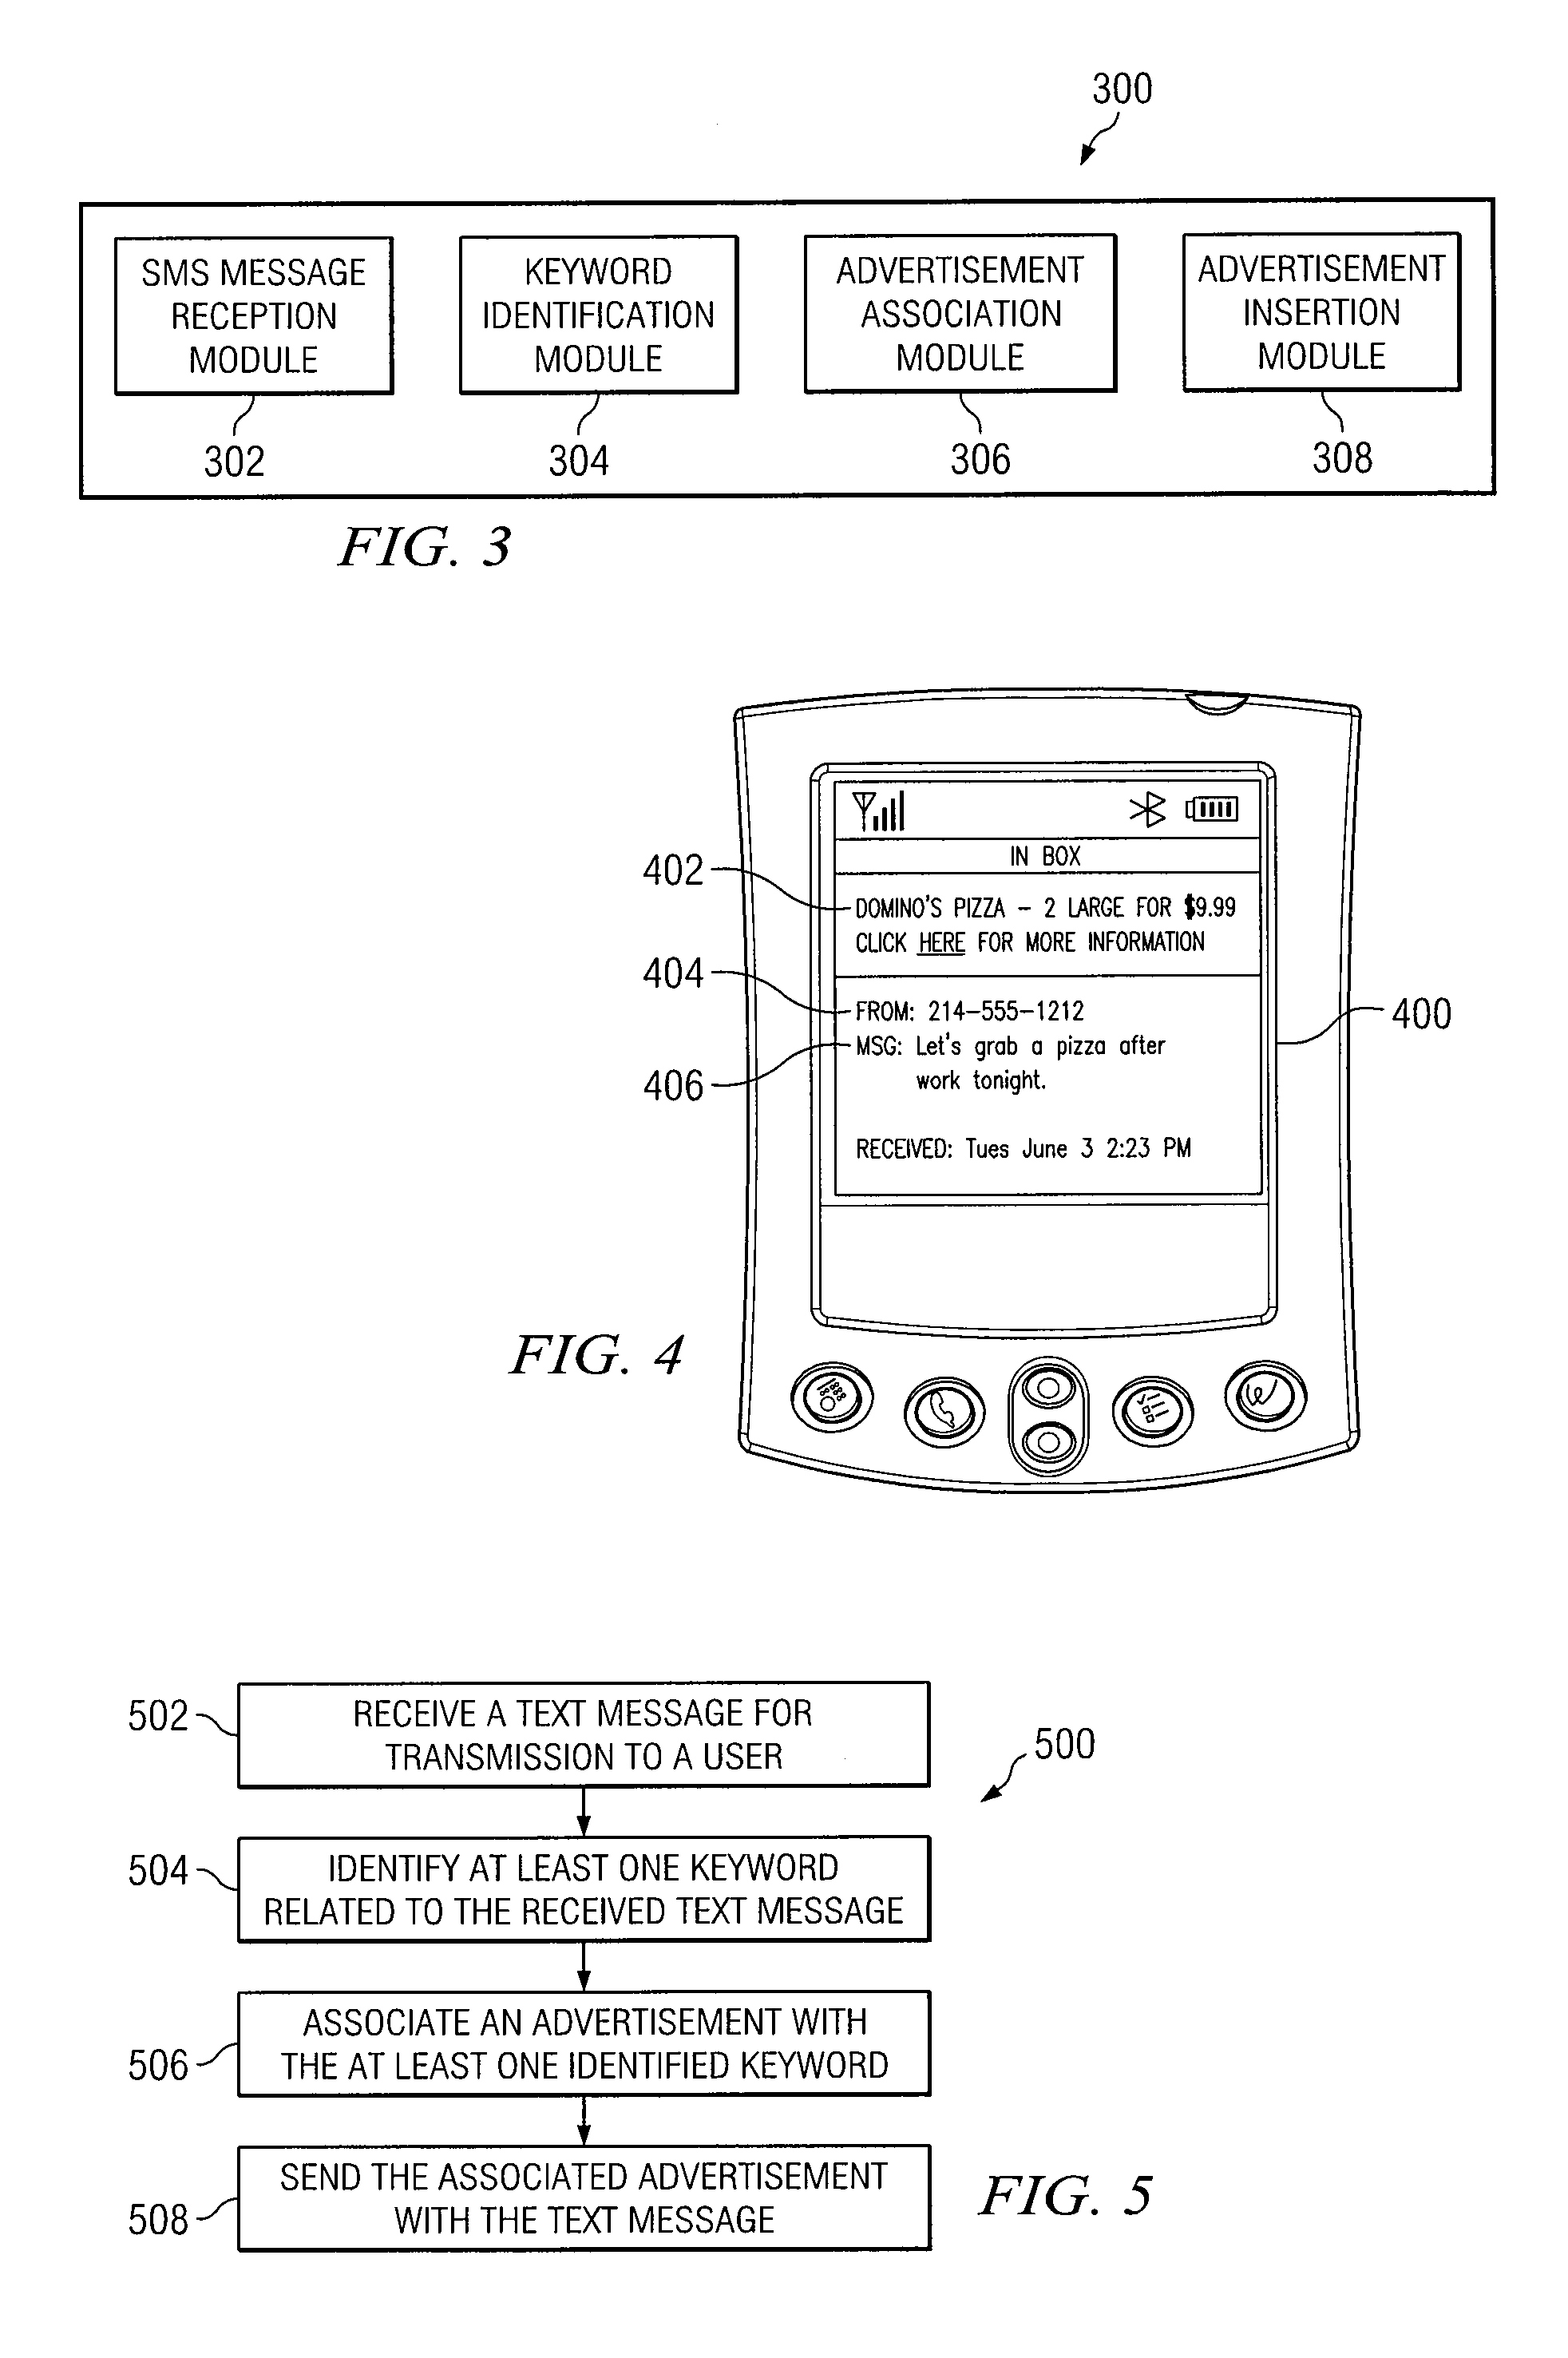 System and method for inserting advertisements into SMS messages